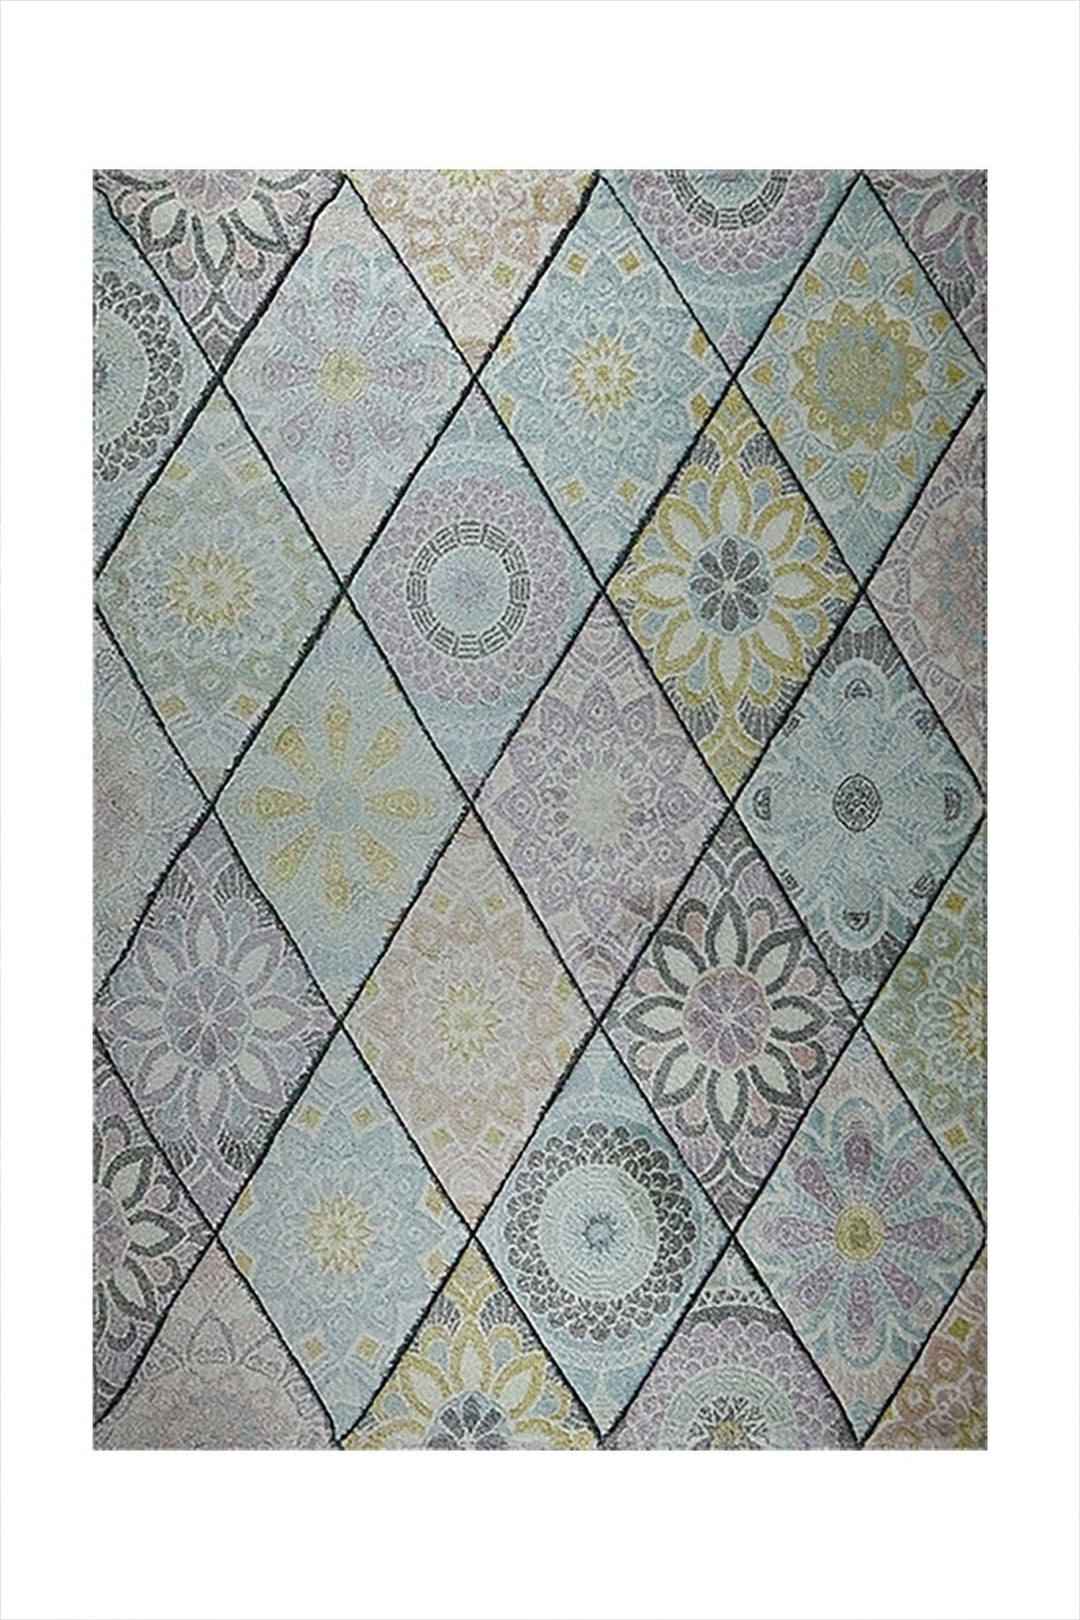 Turkish Modern Festival WD Rug - 5.3 x 7.5 FT - Gray and Cream - Sleek and Minimalist for Chic Interiors - V Surfaces